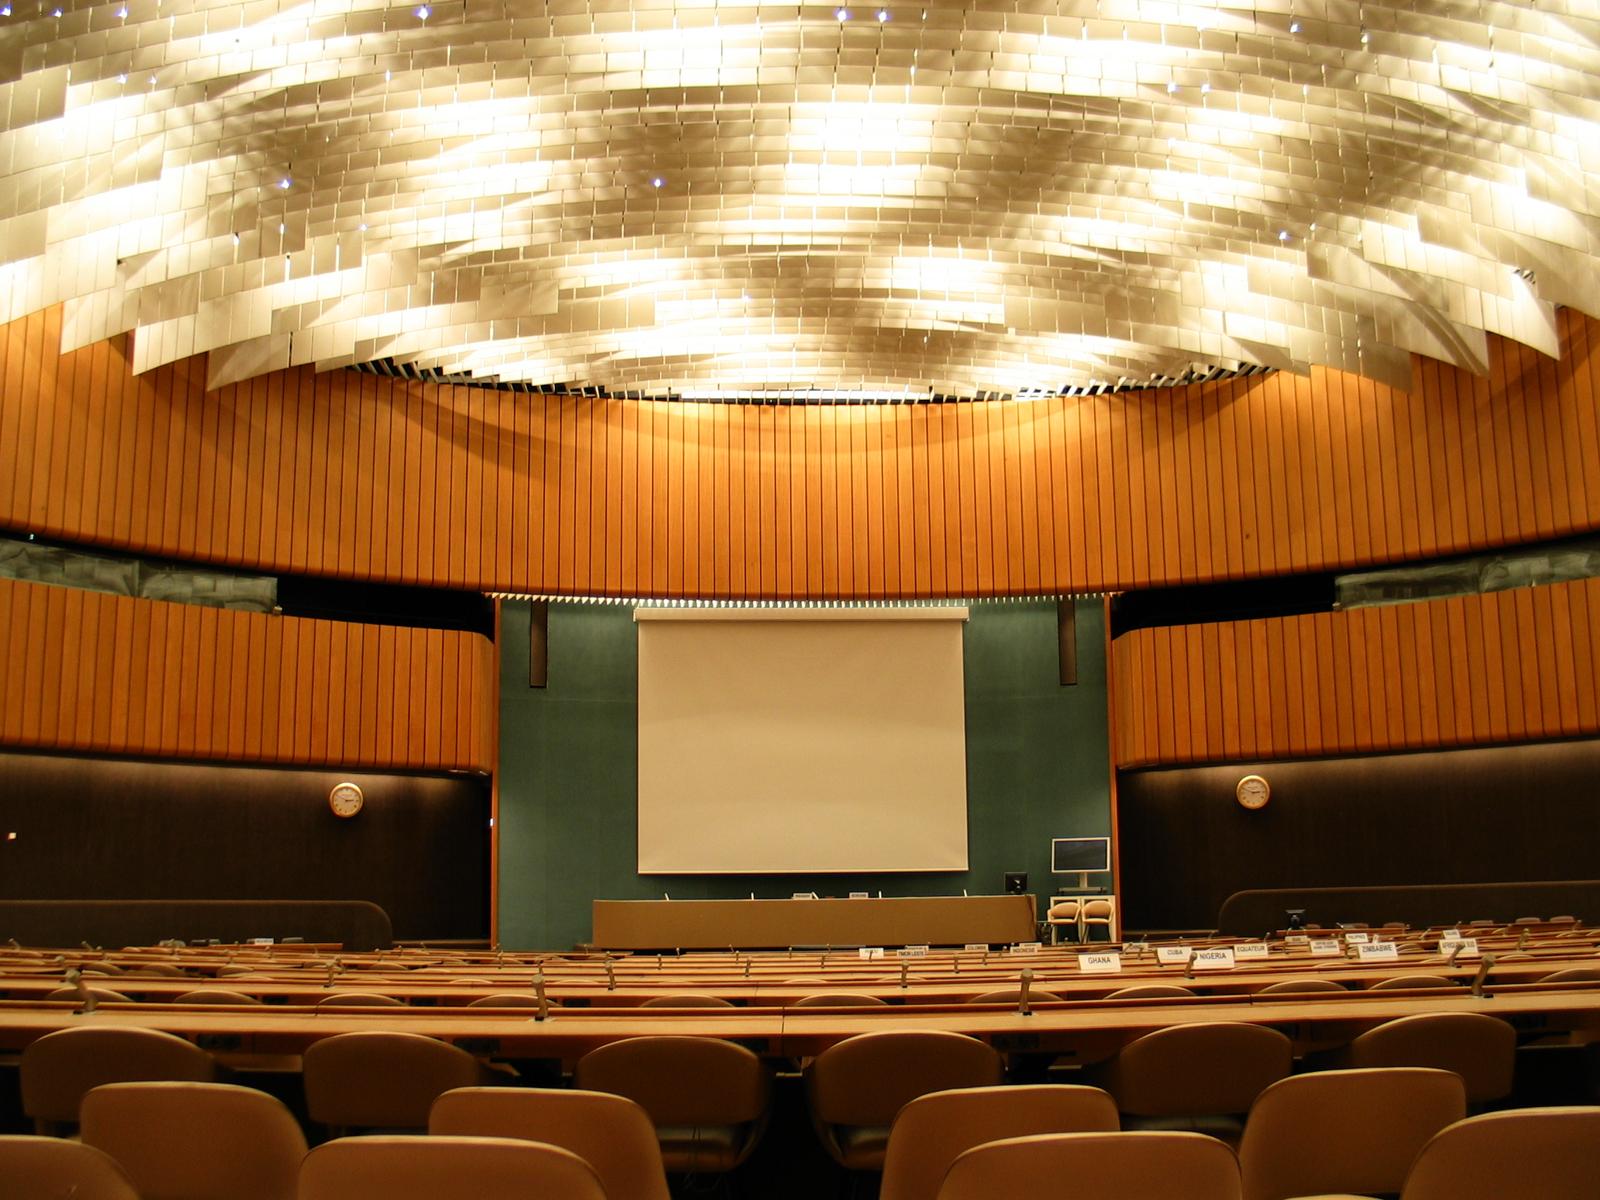 A meeting room in the UN